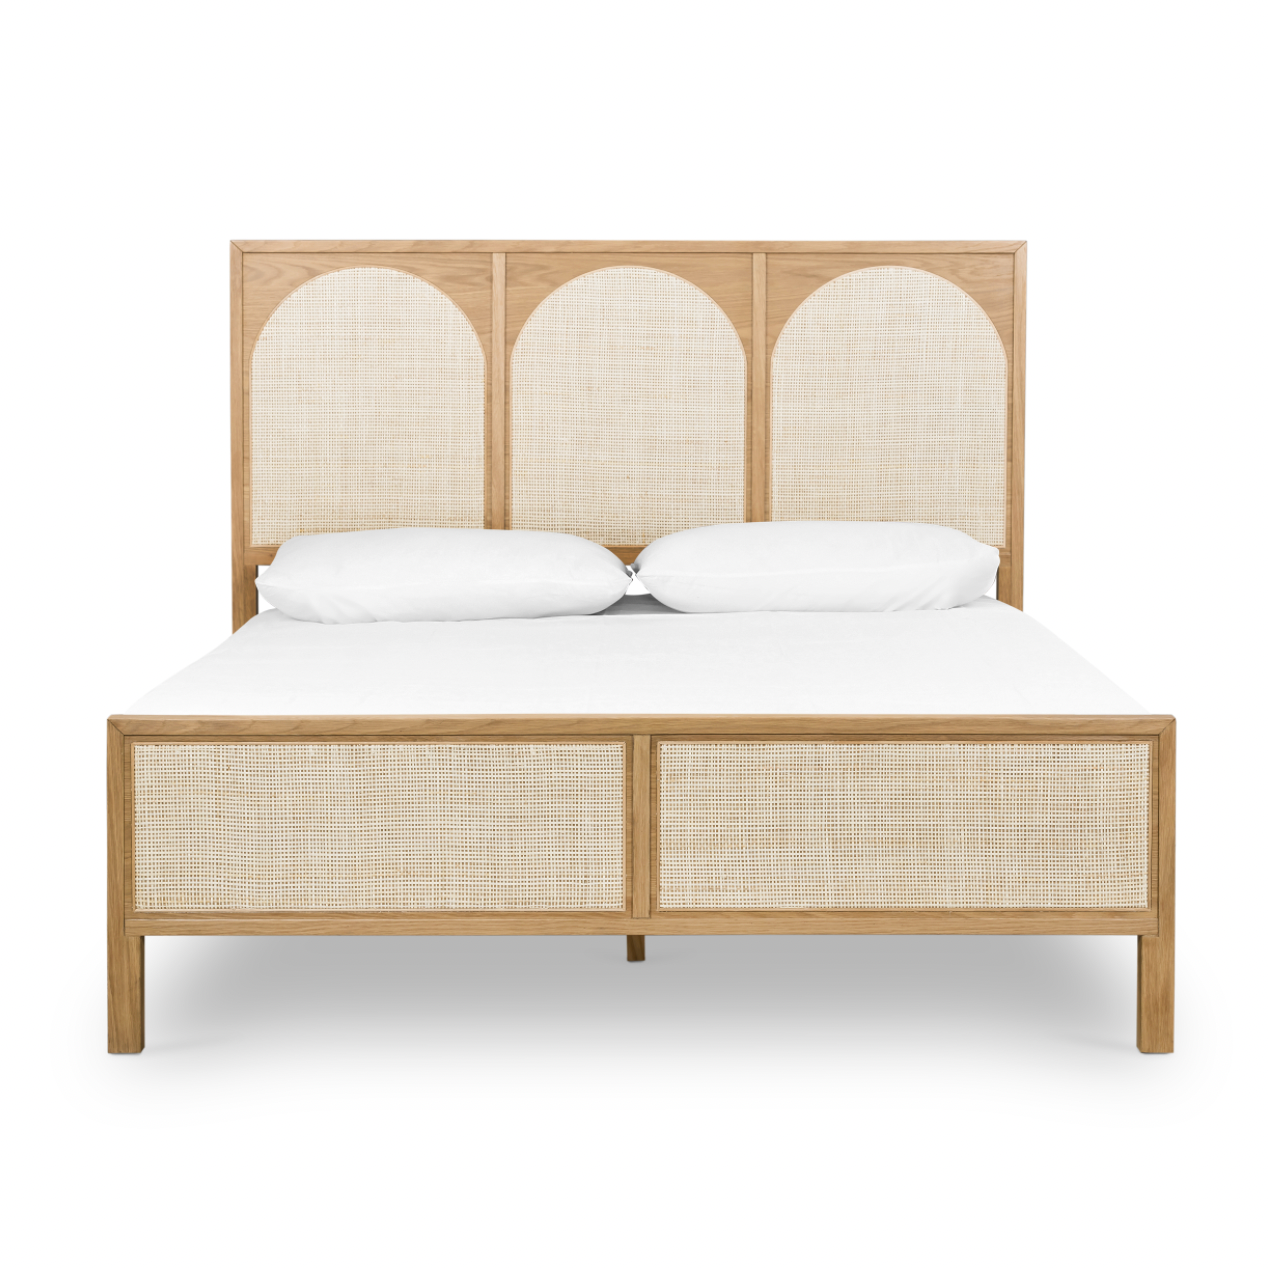 This light oak Allegra Bed frame features wood-backed cane arches and panel footboard detailing, for a soft, neutral look with lasting modernity. Pair with the Allegra Dresser to complete the whole look.   Queen Overall Dimensions: 63.00"w x 84.00"d x 48.00"h King Overall Dimensions: 79.00"w x 84.00"d x 48.00"h